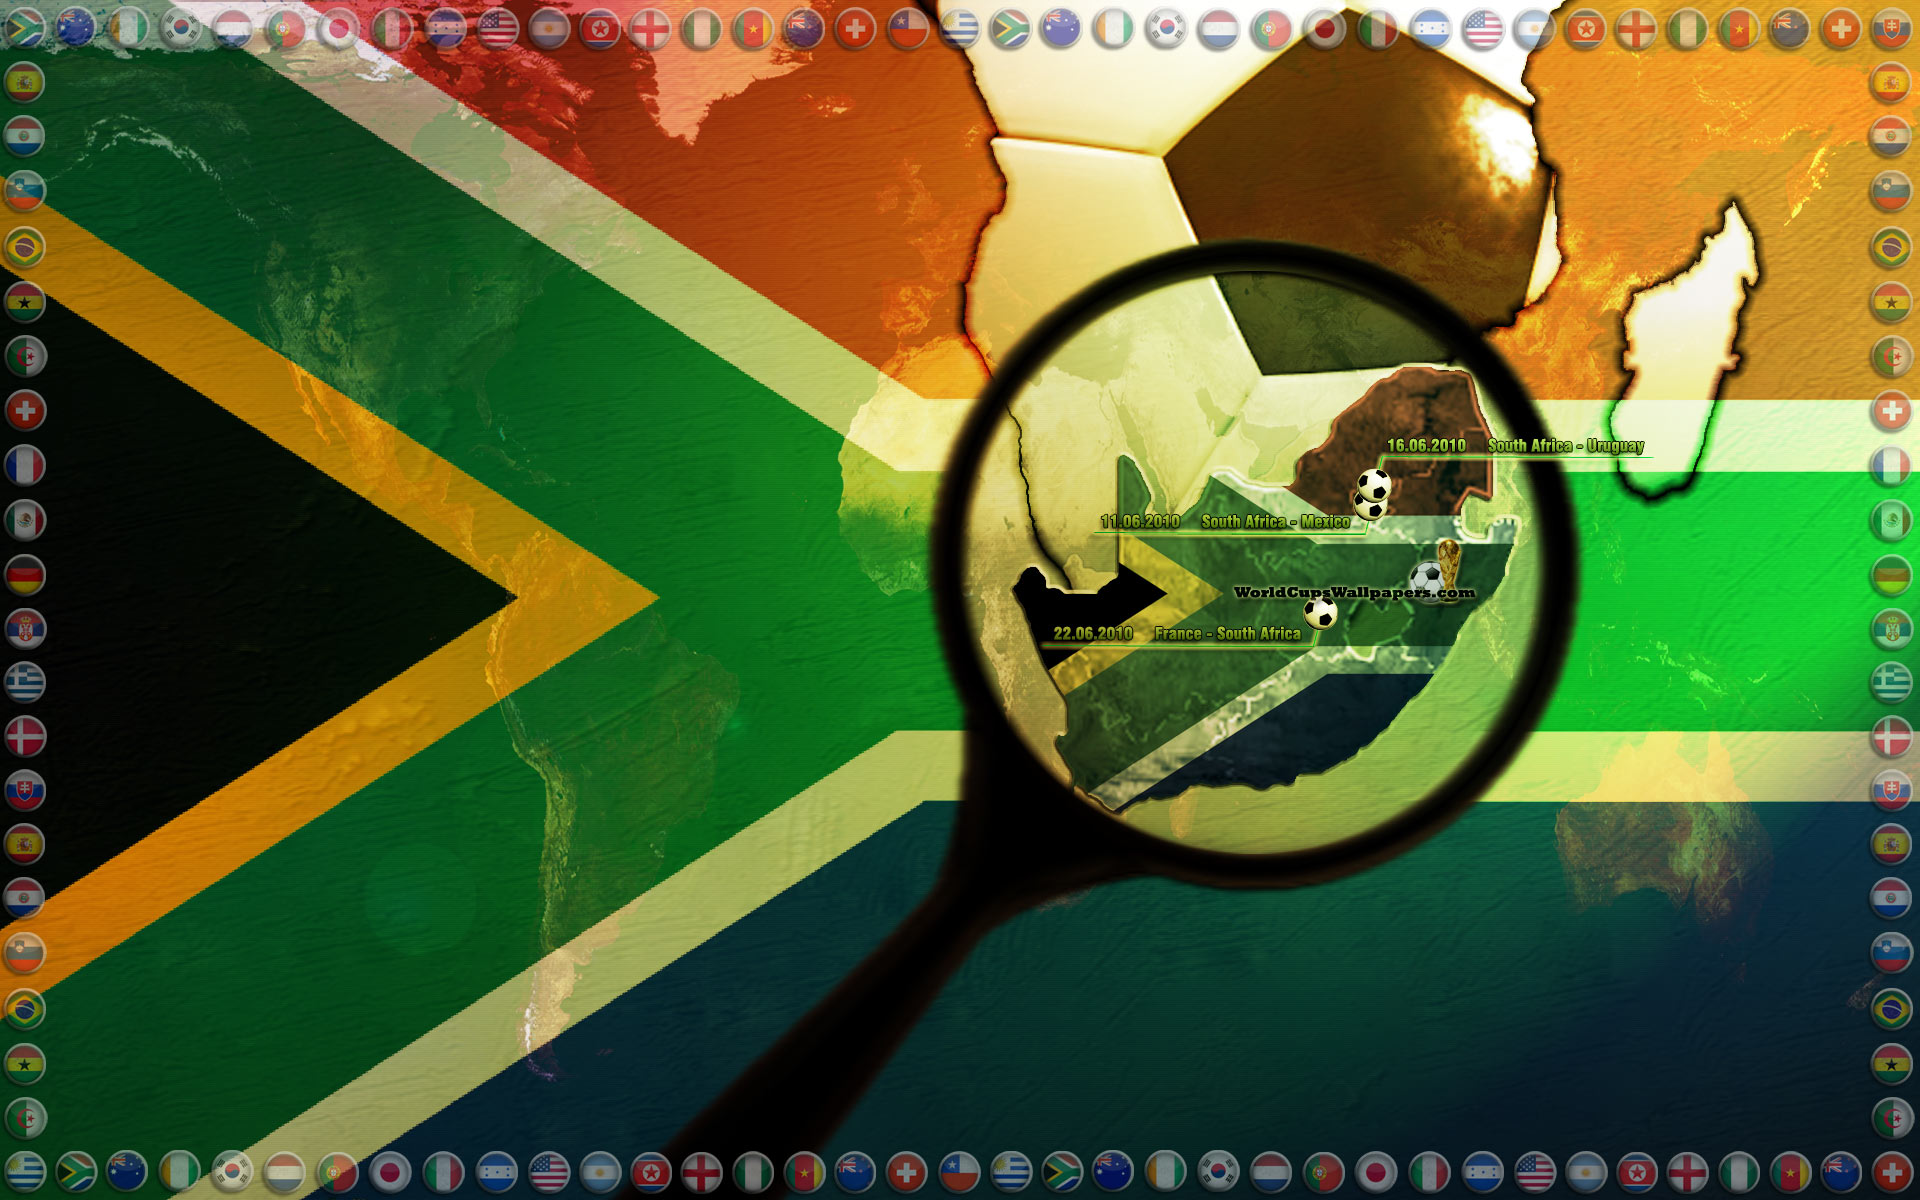 South Africa World Cup Picture X Pixels